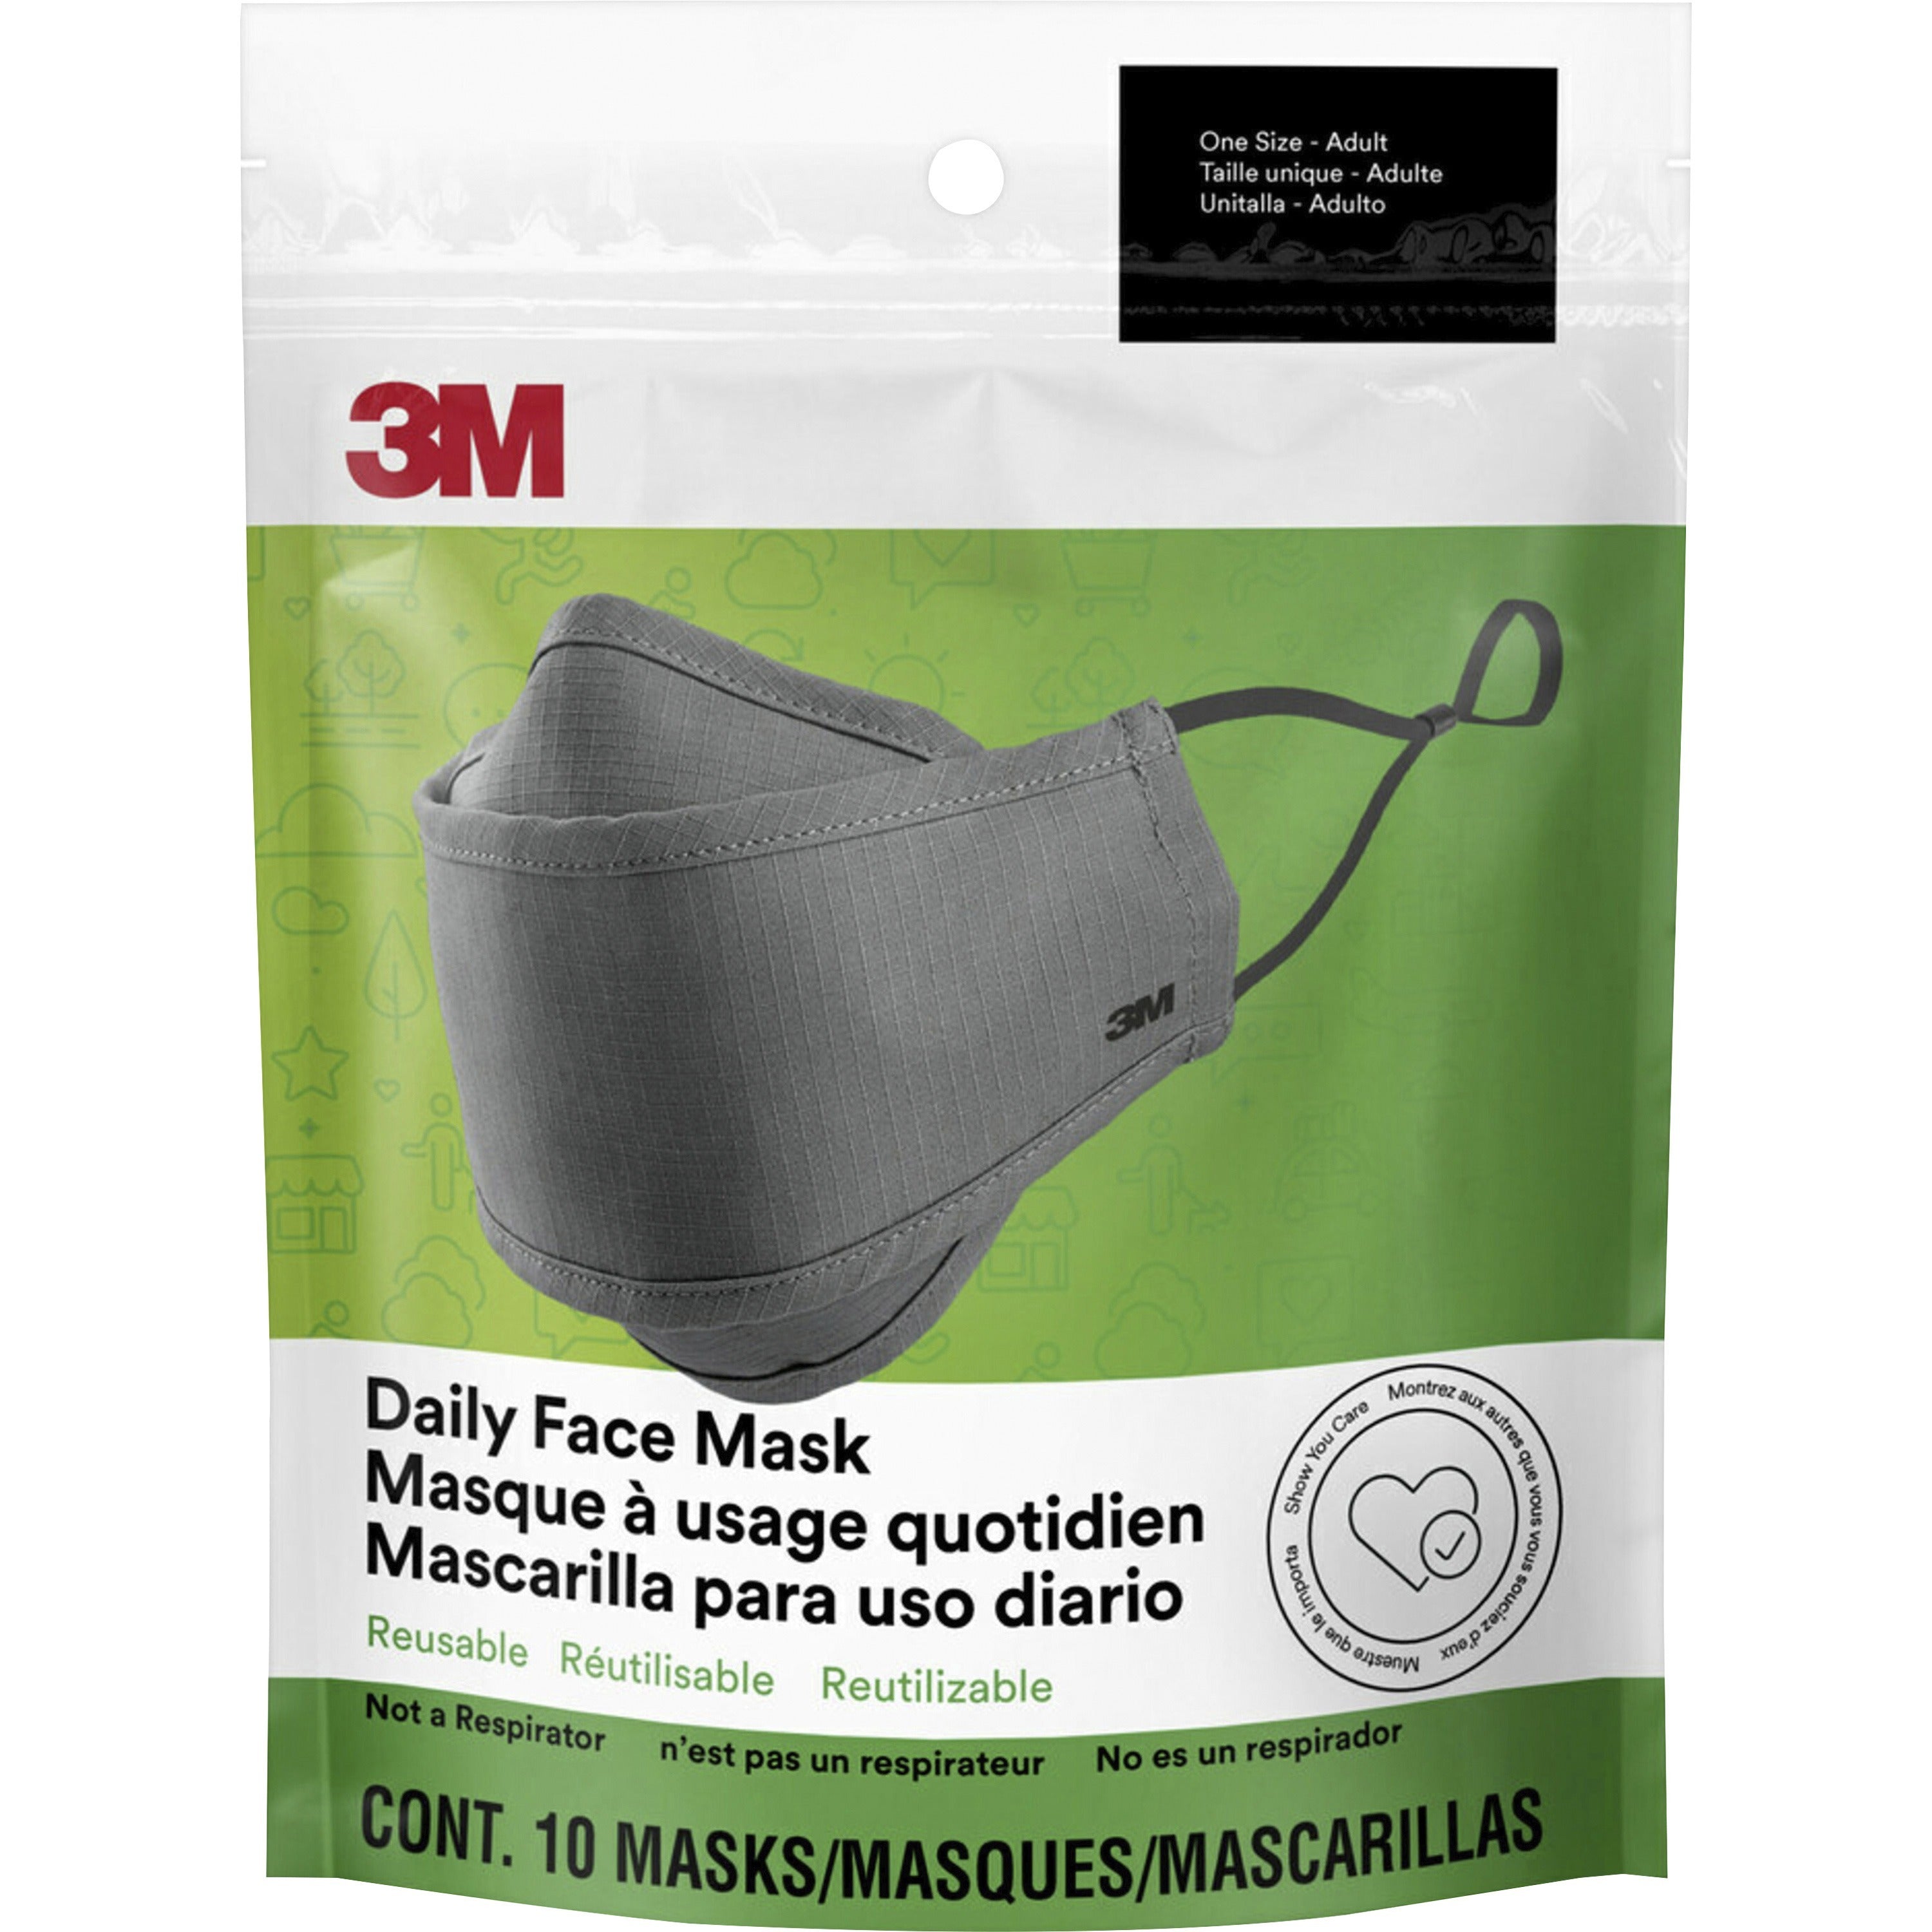 3m-daily-face-masks-recommended-for-face-indoor-outdoor-office-transportation-cotton-fabric-gray-lightweight-breathable-adjustable-elastic-loop-nose-clip-comfortable-washable-10-pack_mmmrfm10010 - 1